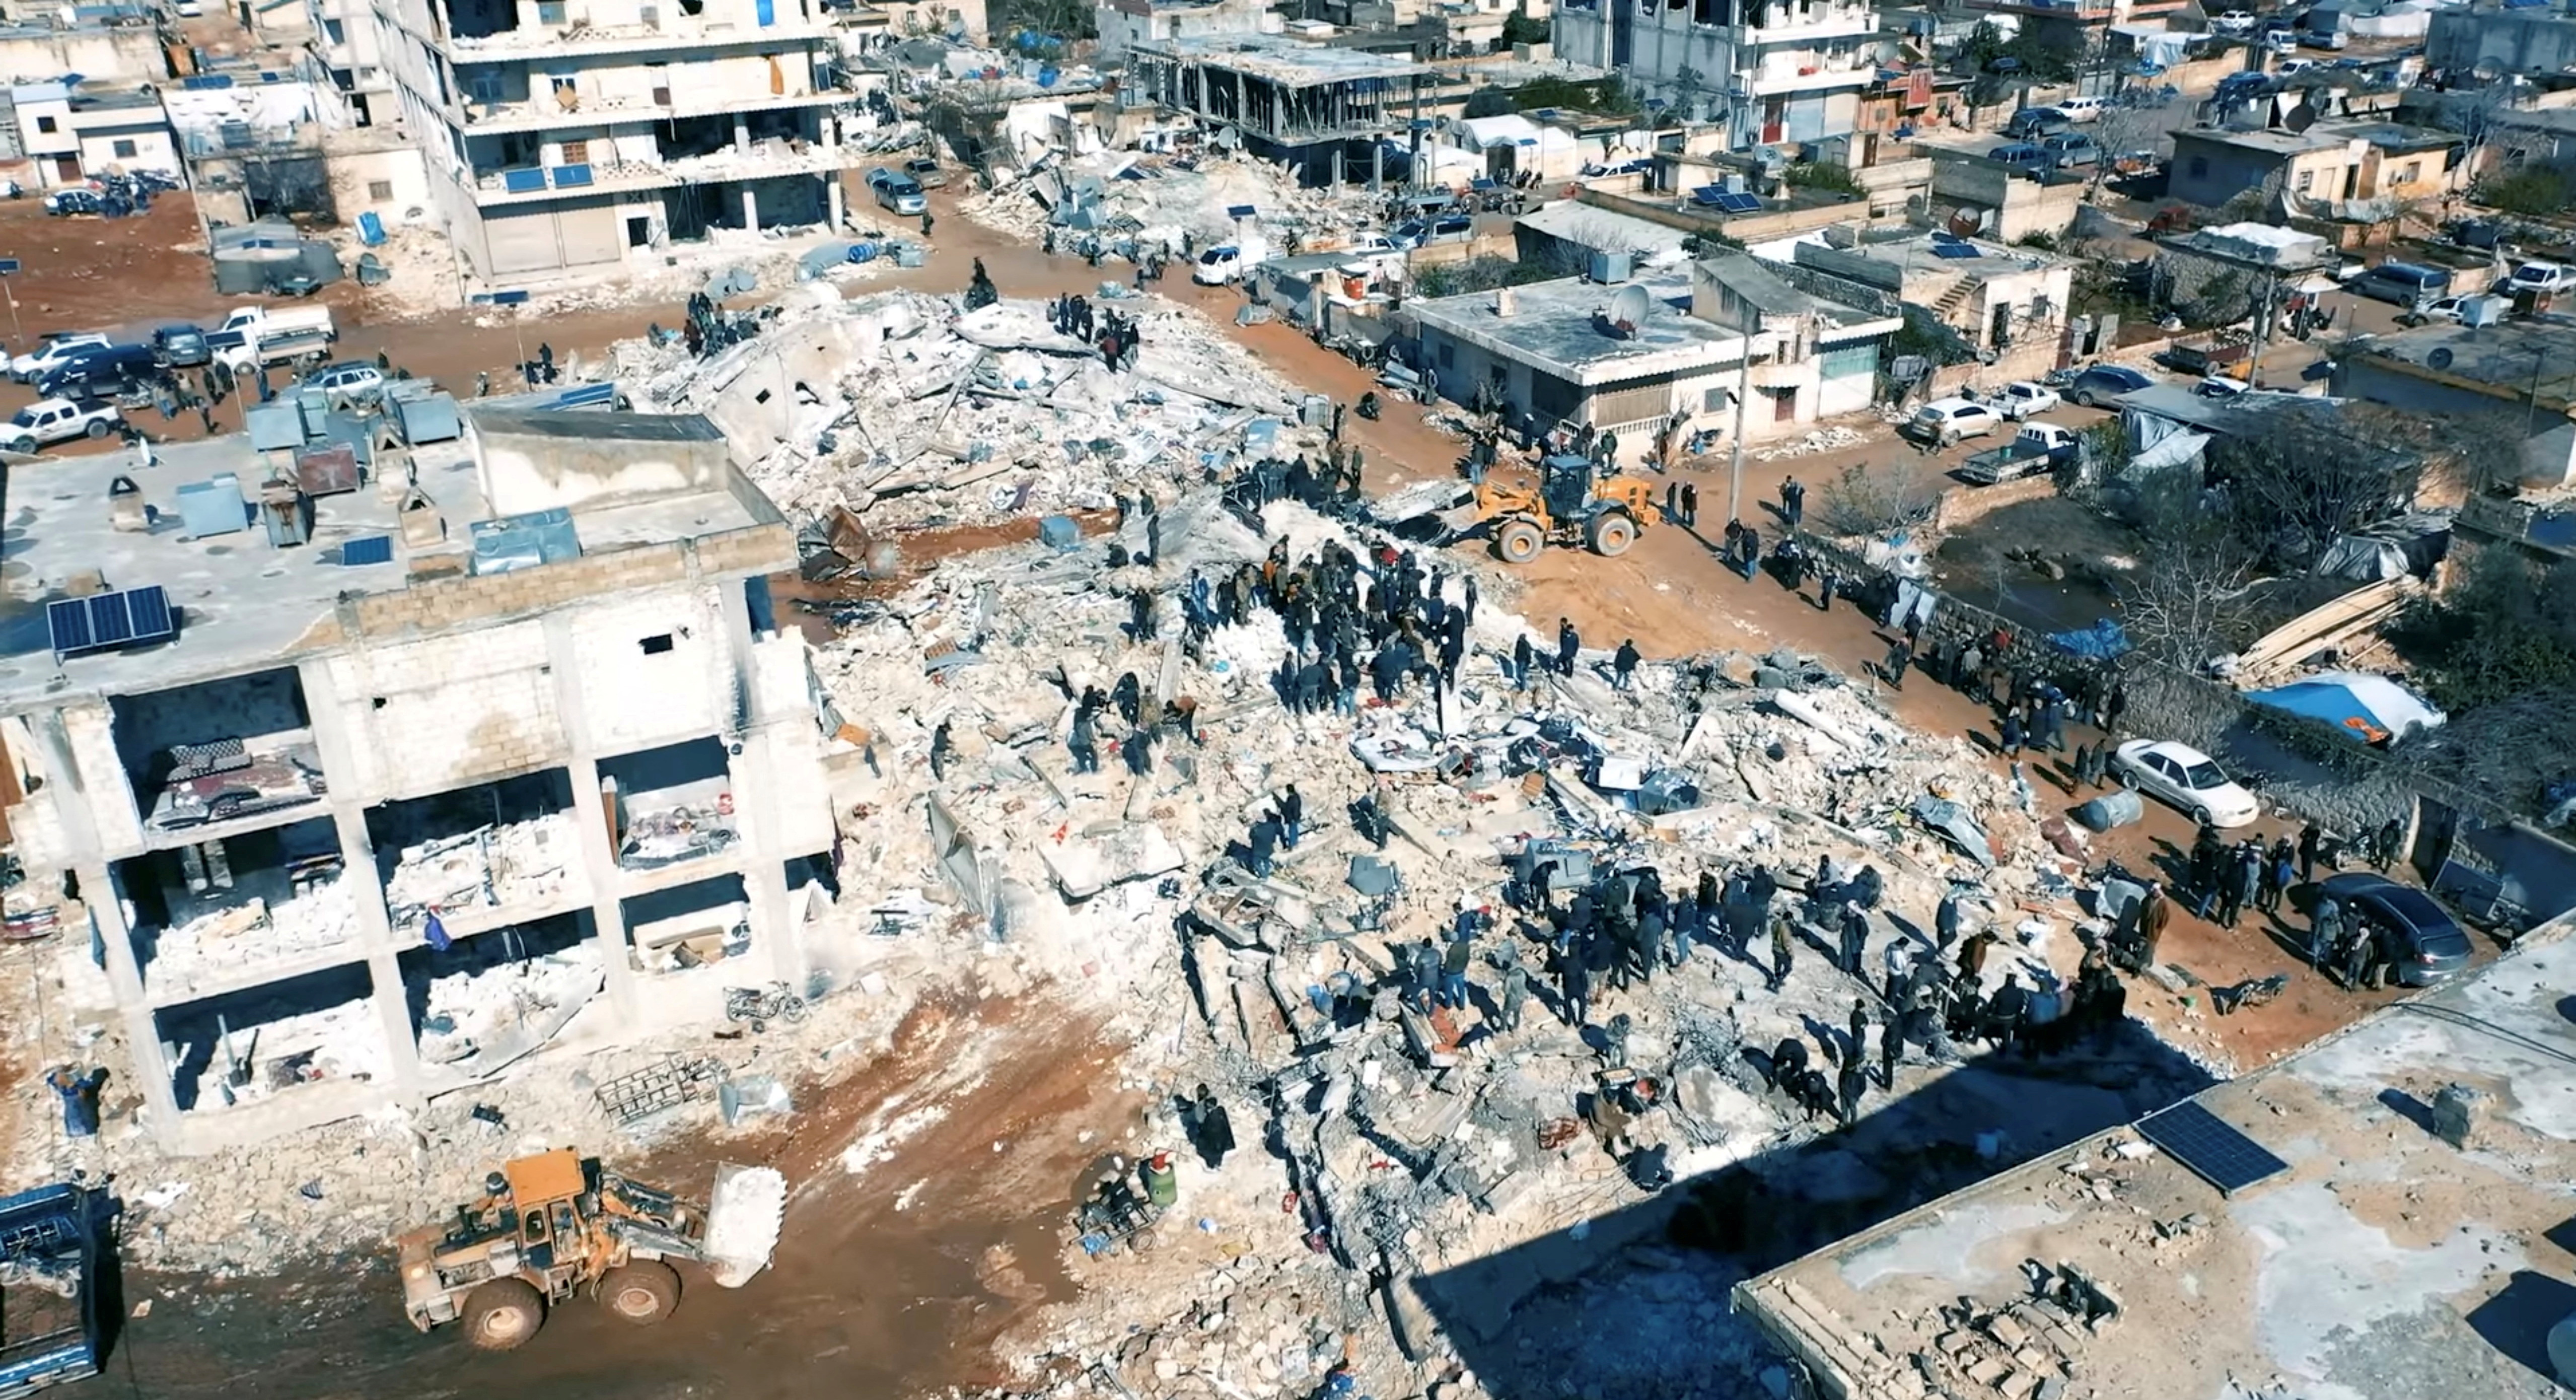 Aftermath of an earthquake in Aleppo